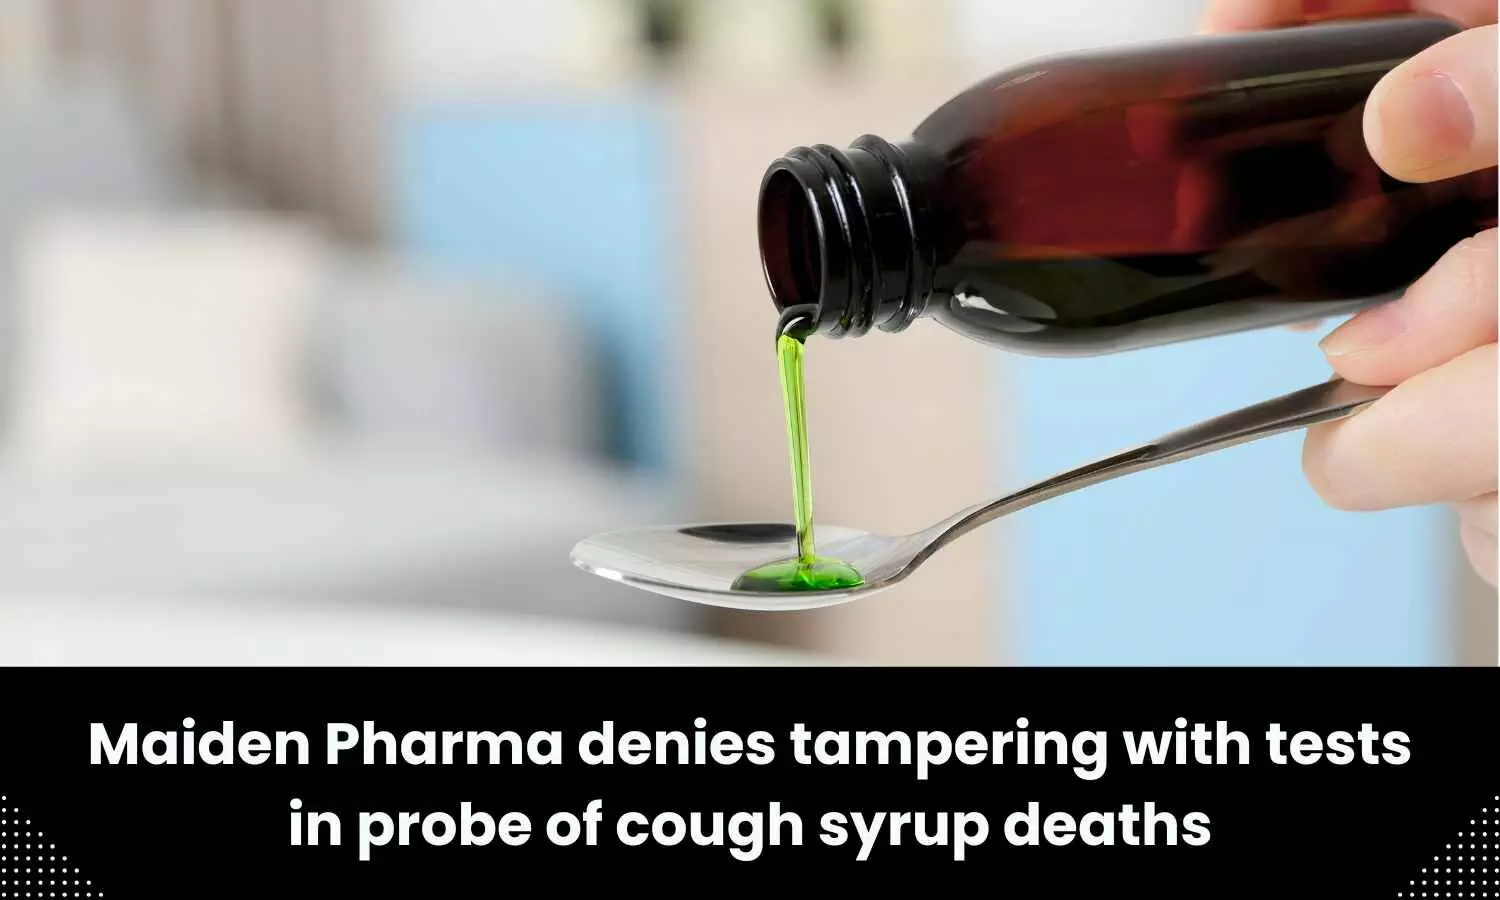 Maiden Pharma denies tampering with tests in investigation of cough syrup deaths